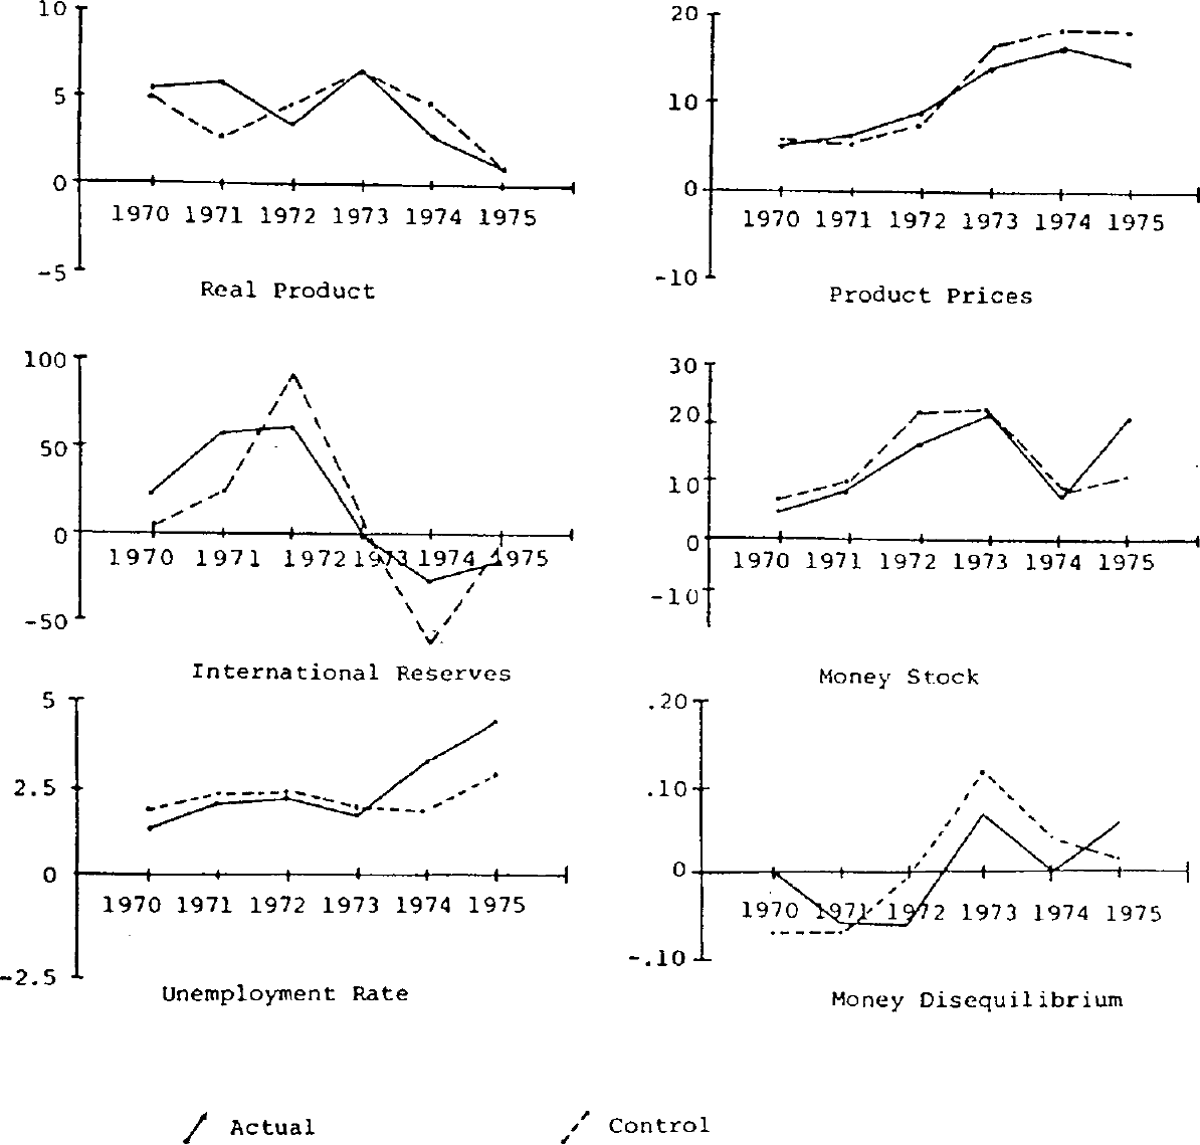 Figure 2: Actual and Control Simulation Values for Growth Rates of Key Variables, Unemployment Rate and a Measure of Money Disequilibrium